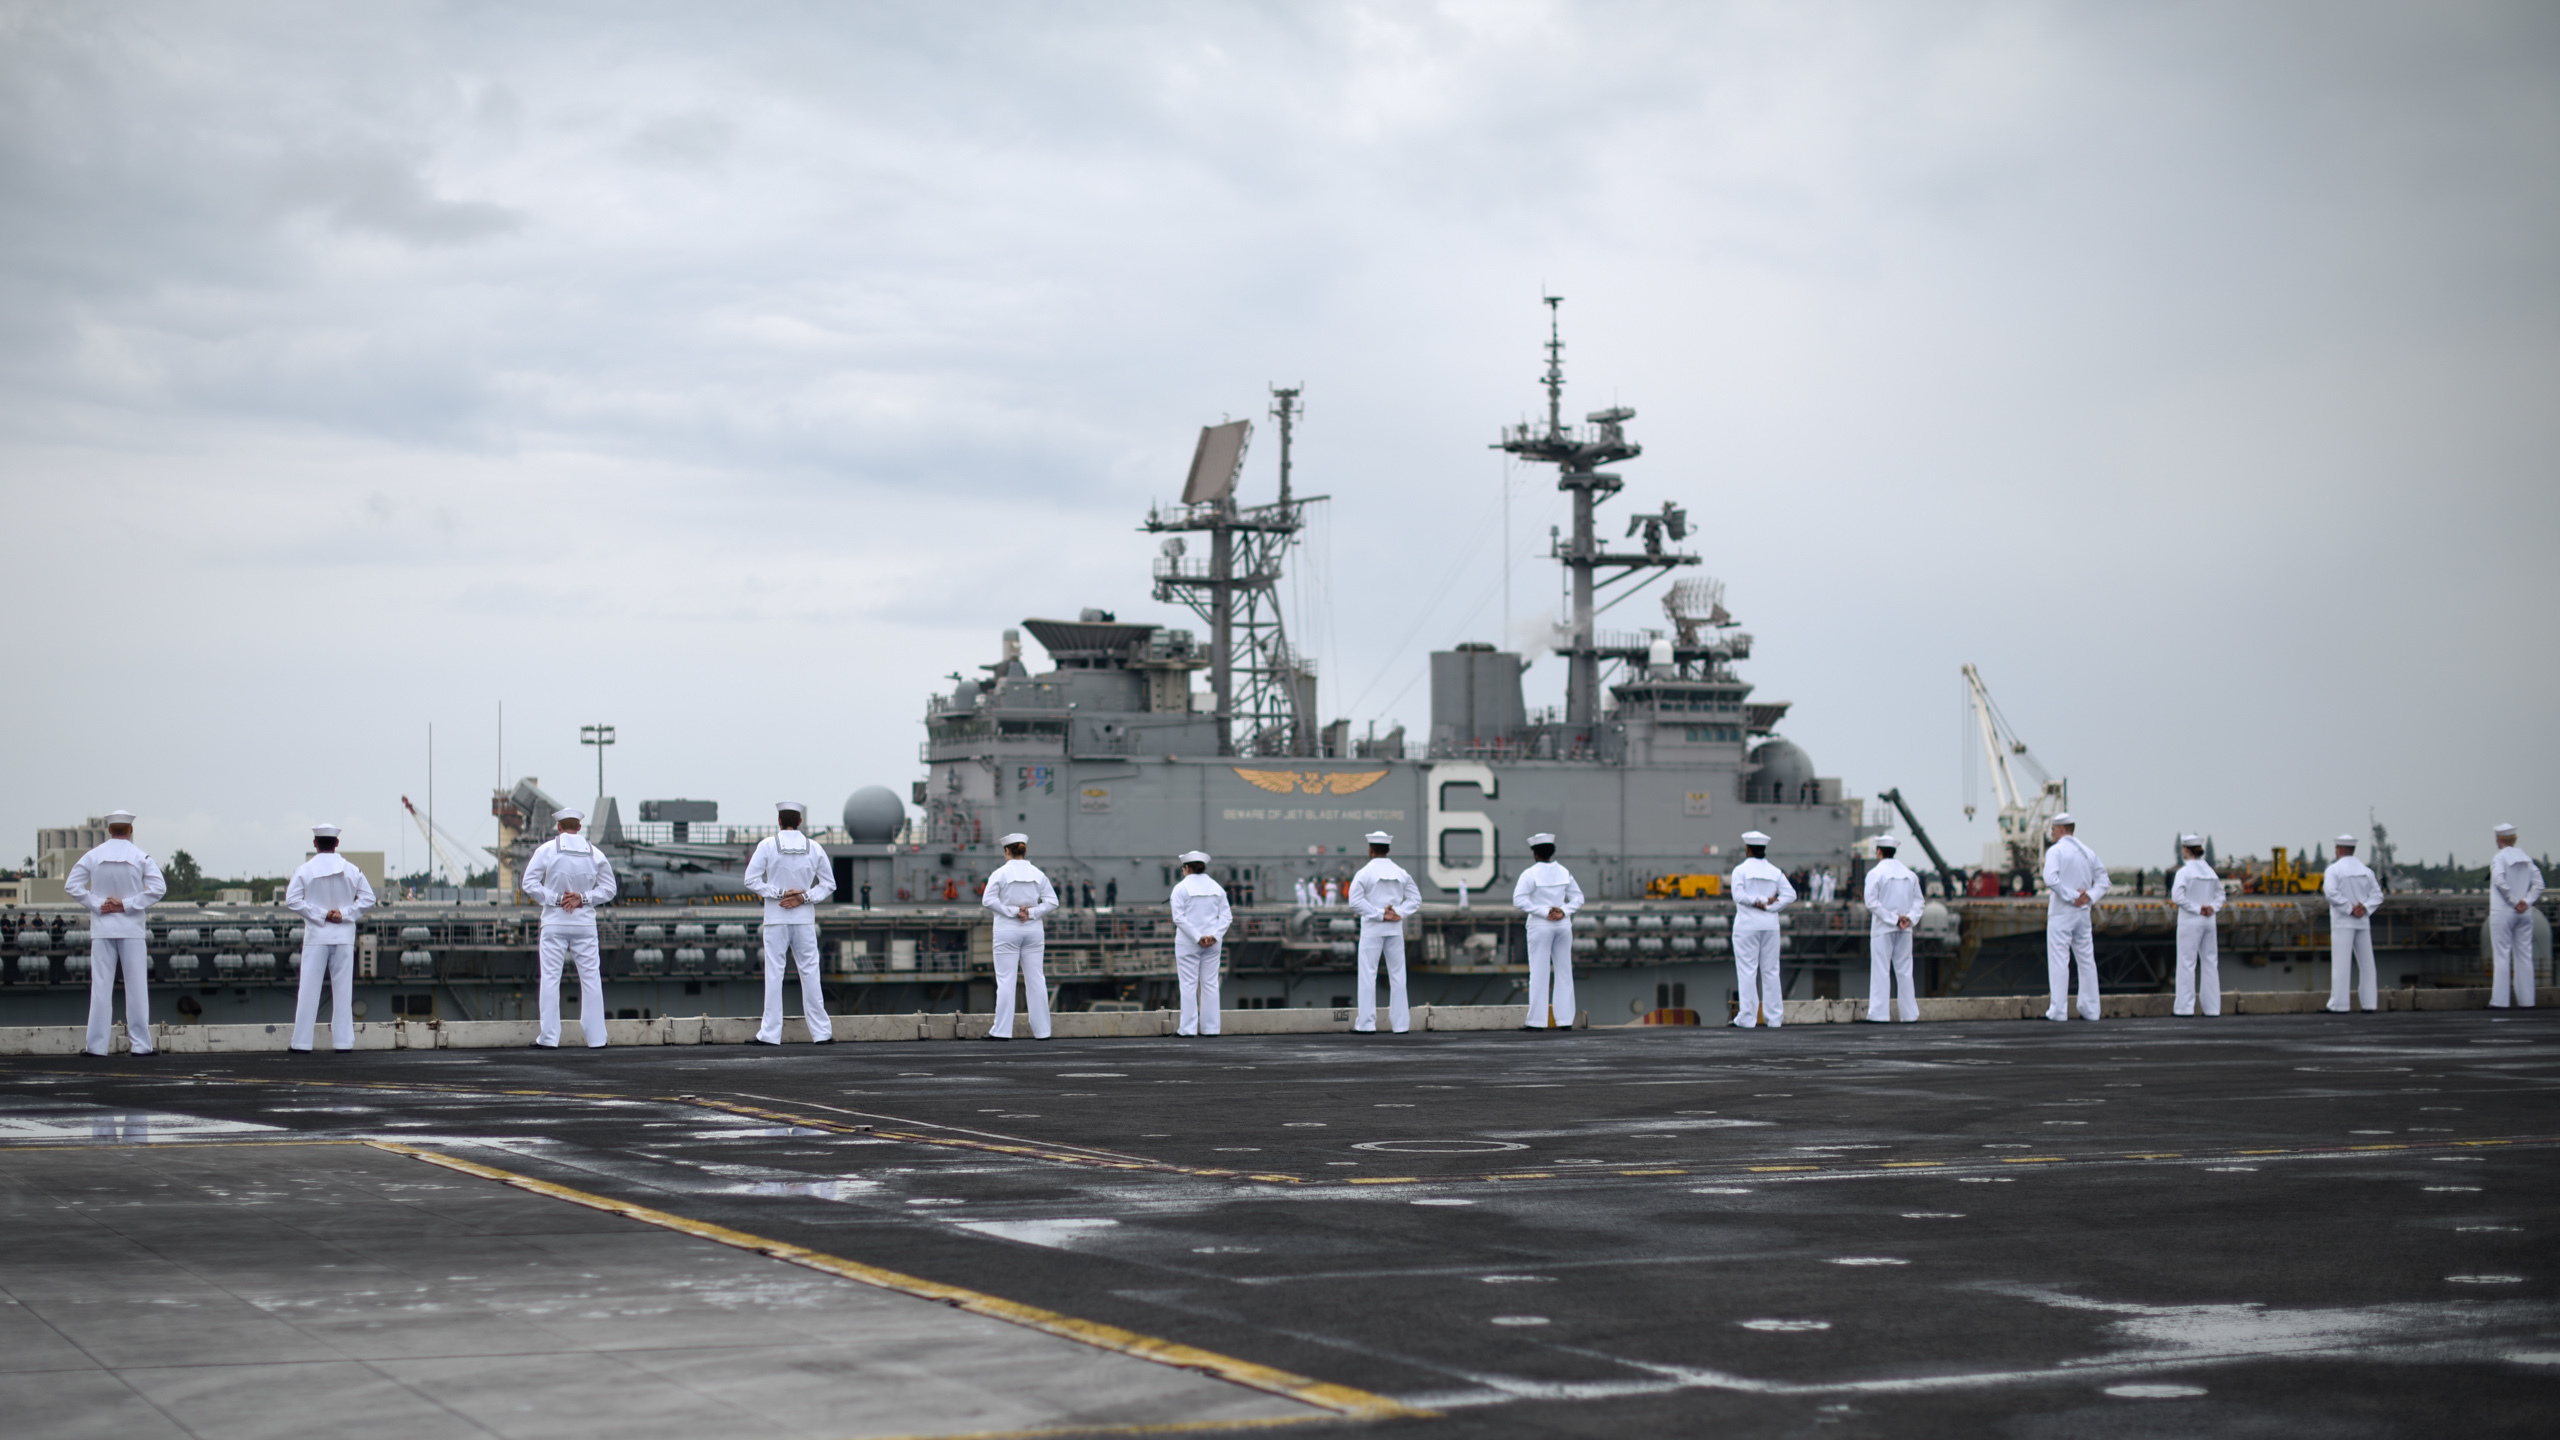 PEARL HARBOR, Hawaii (April 27, 2018) Sailors man the rails of the aircraft carrier USS Theodore Roosevelt (CVN 71) as the ship arrives at Joint Base Pearl Harbor-Hickam for a regularly scheduled port visit. Theodore Roosevelt is underway for a regularly scheduled deployment in the western Pacific. U.S. Navy photo by Mass Communication Specialist Seaman Michael Hogan. -